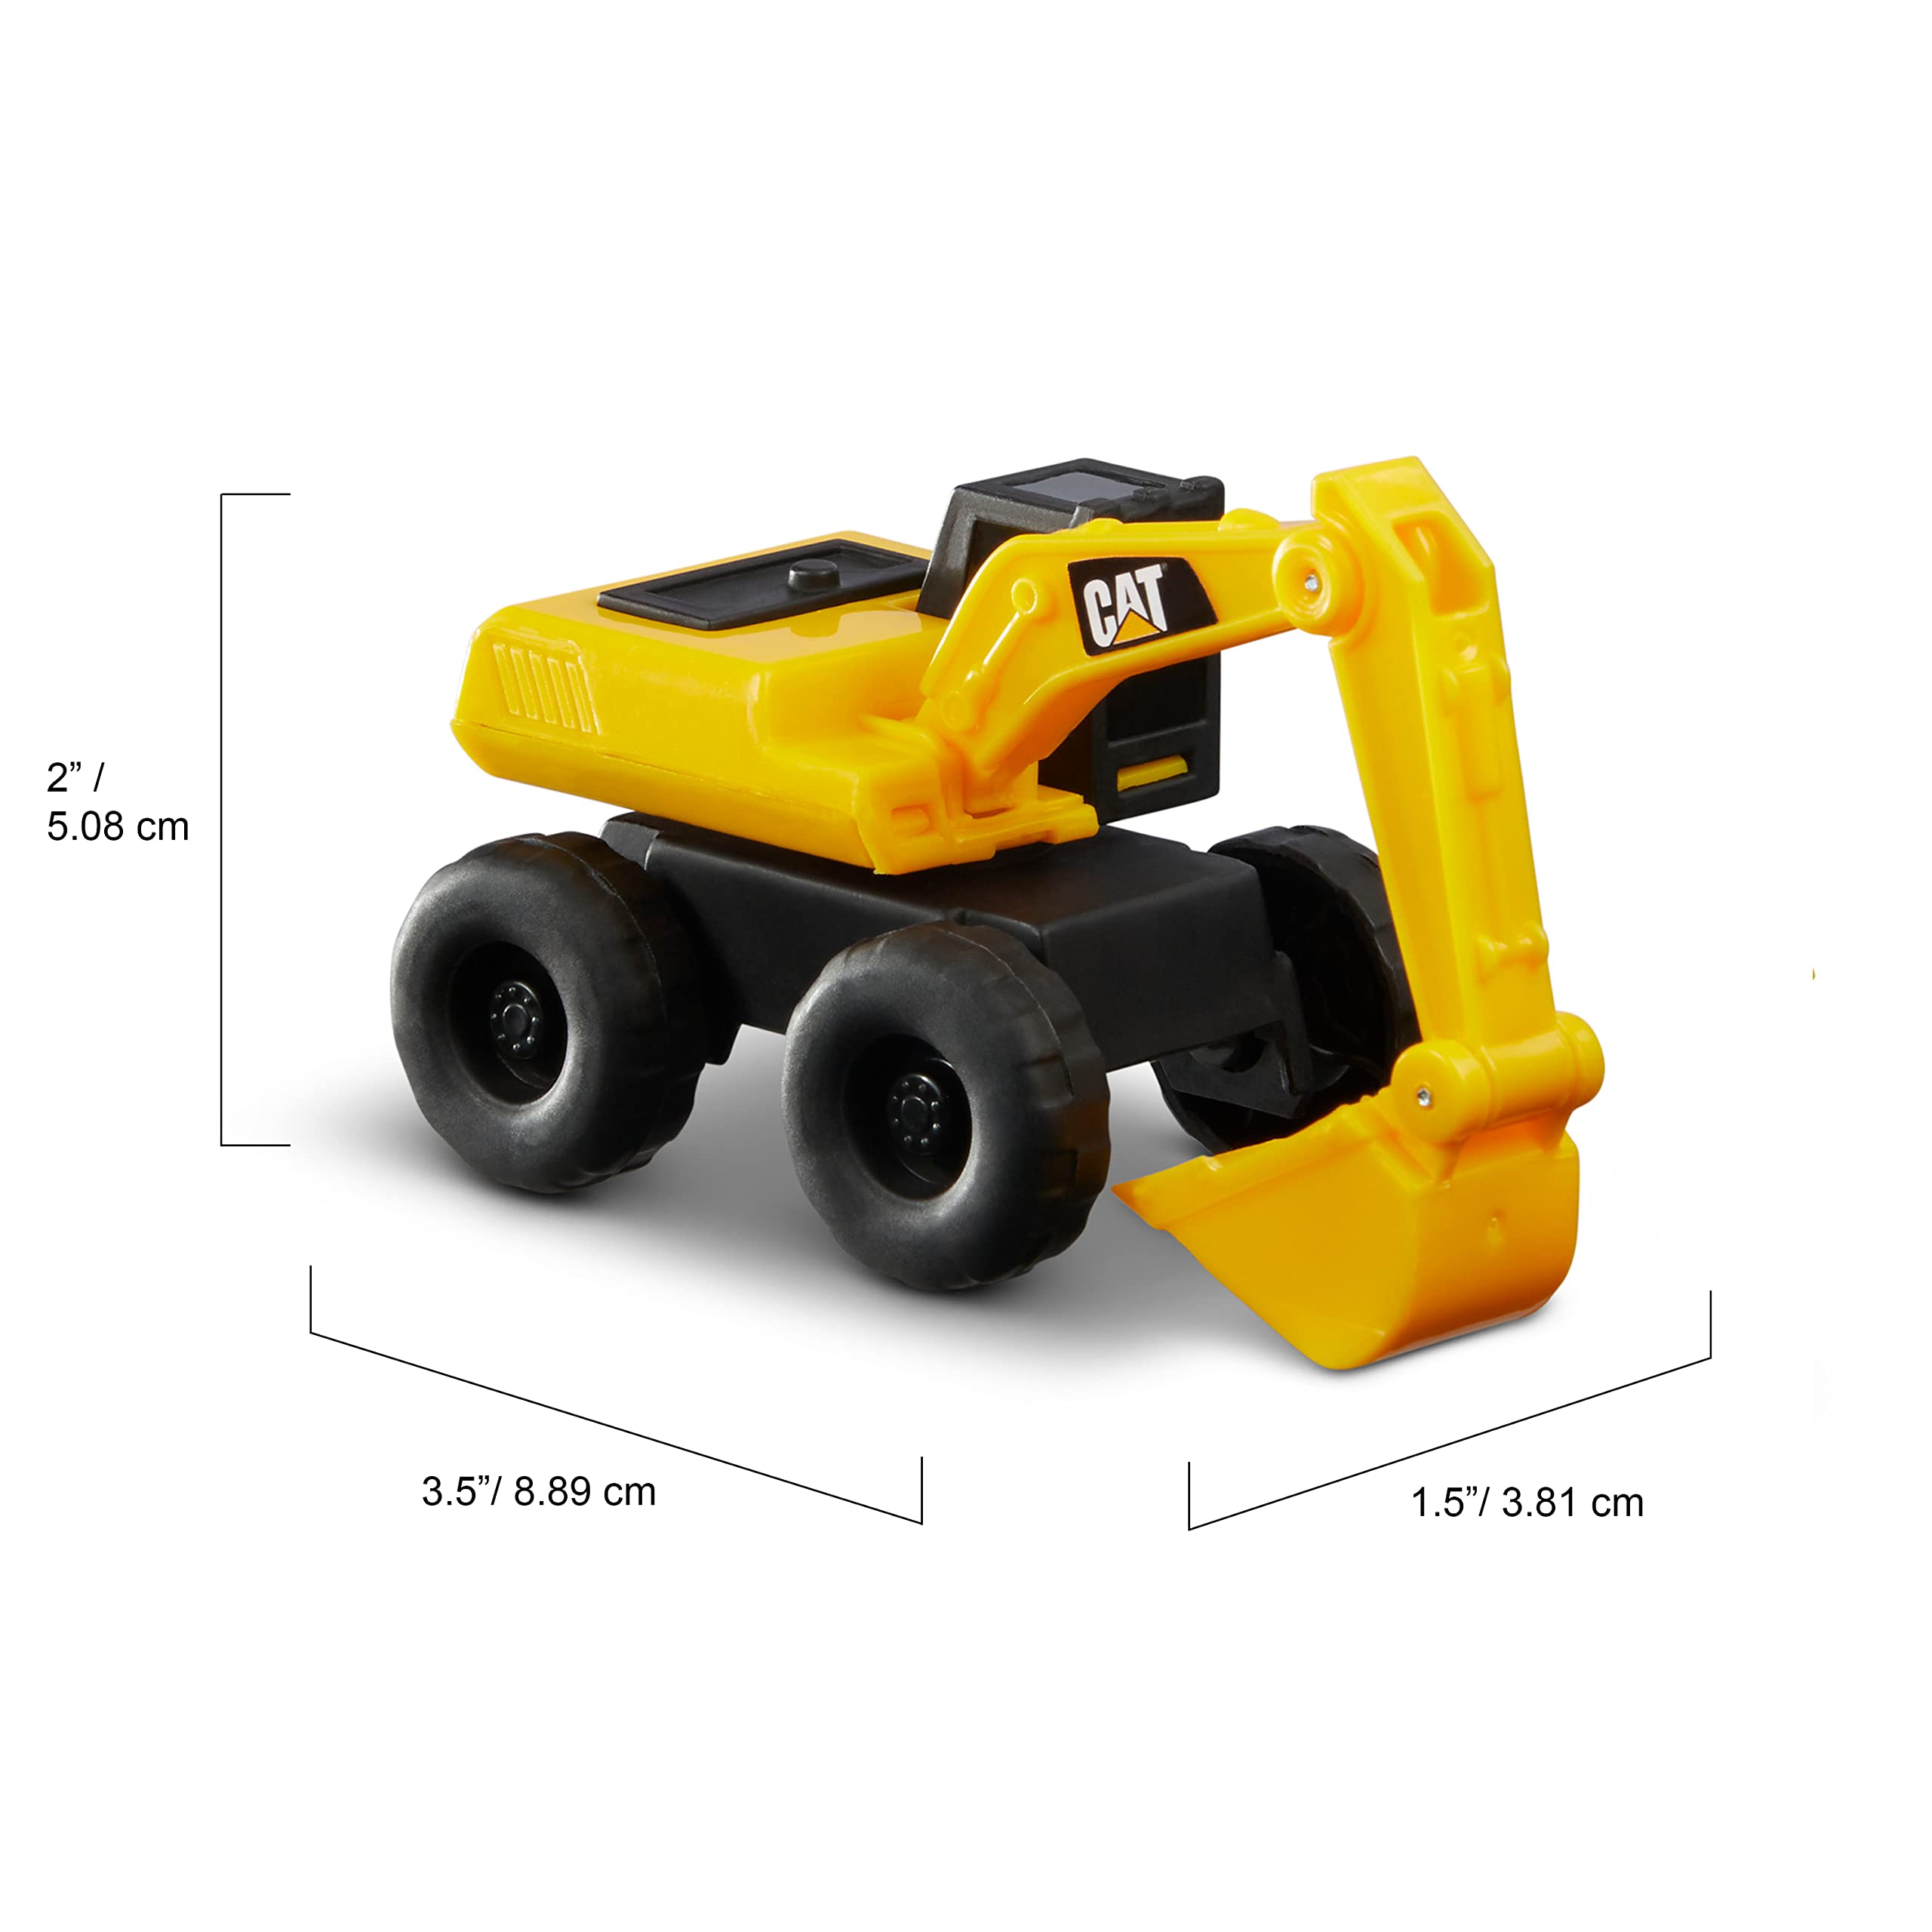 CatToysOfficial, CAT Little Machines Toys with 5pcs - Dump Truck, Wheel Loader, Bulldozer, Backhoe, and Excavator Vehicles, Cake Toppers, Playset for Kids Ages 3 and up,Yellow